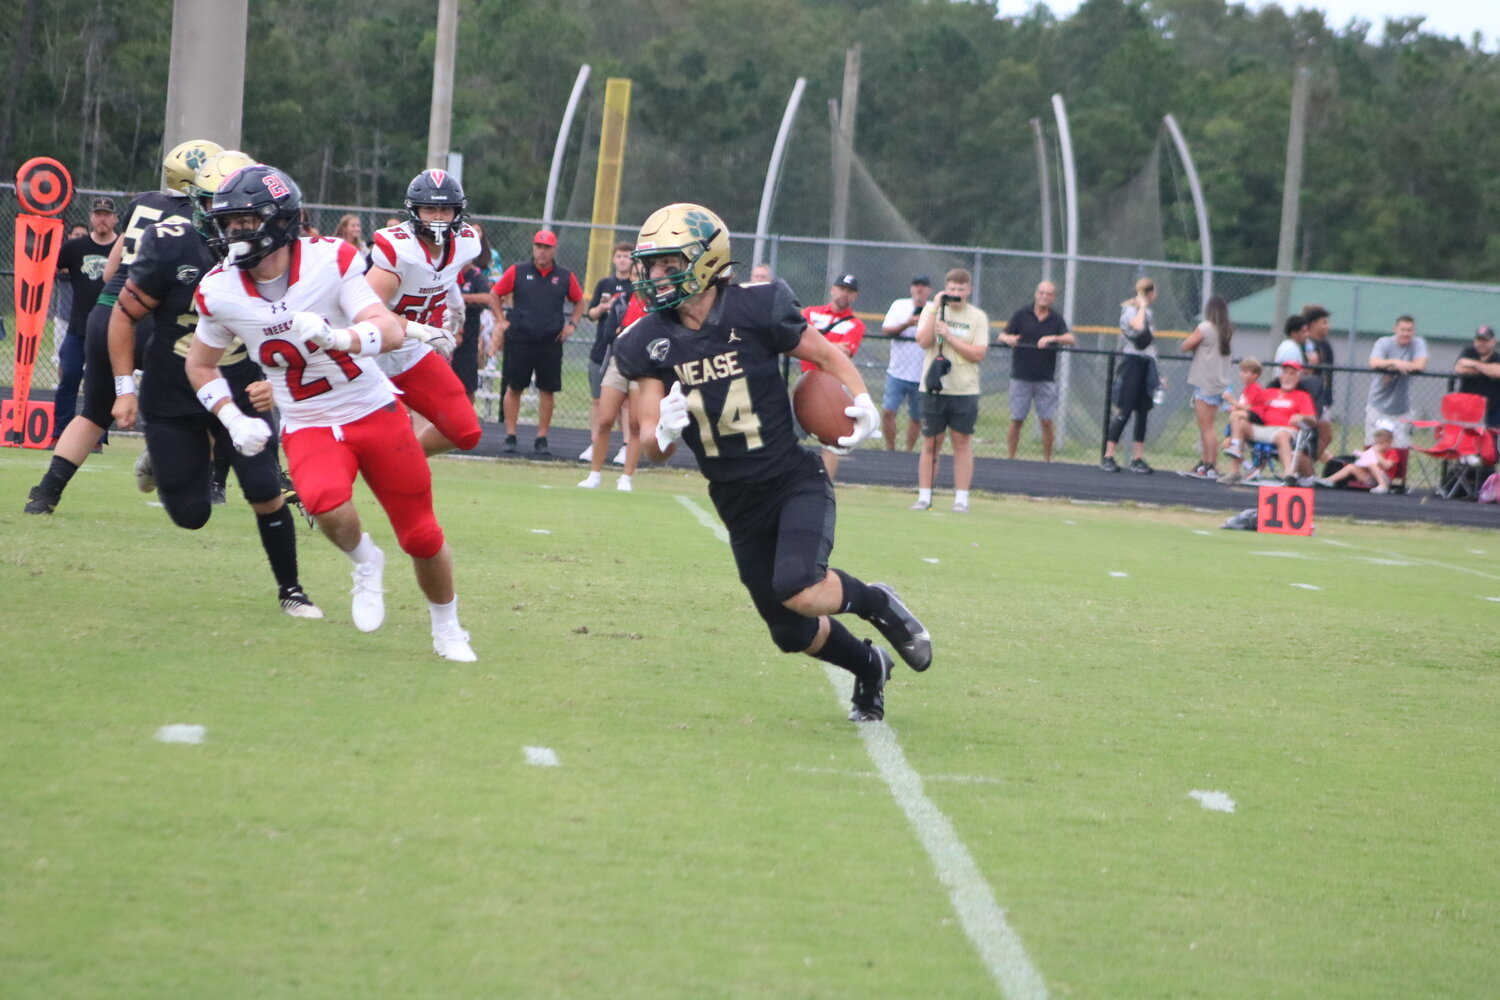 Junior Maddux Spencer exploded with 14 receptions for 289 yards through the air in week two against Creekside. He looks to continue that moving forward.